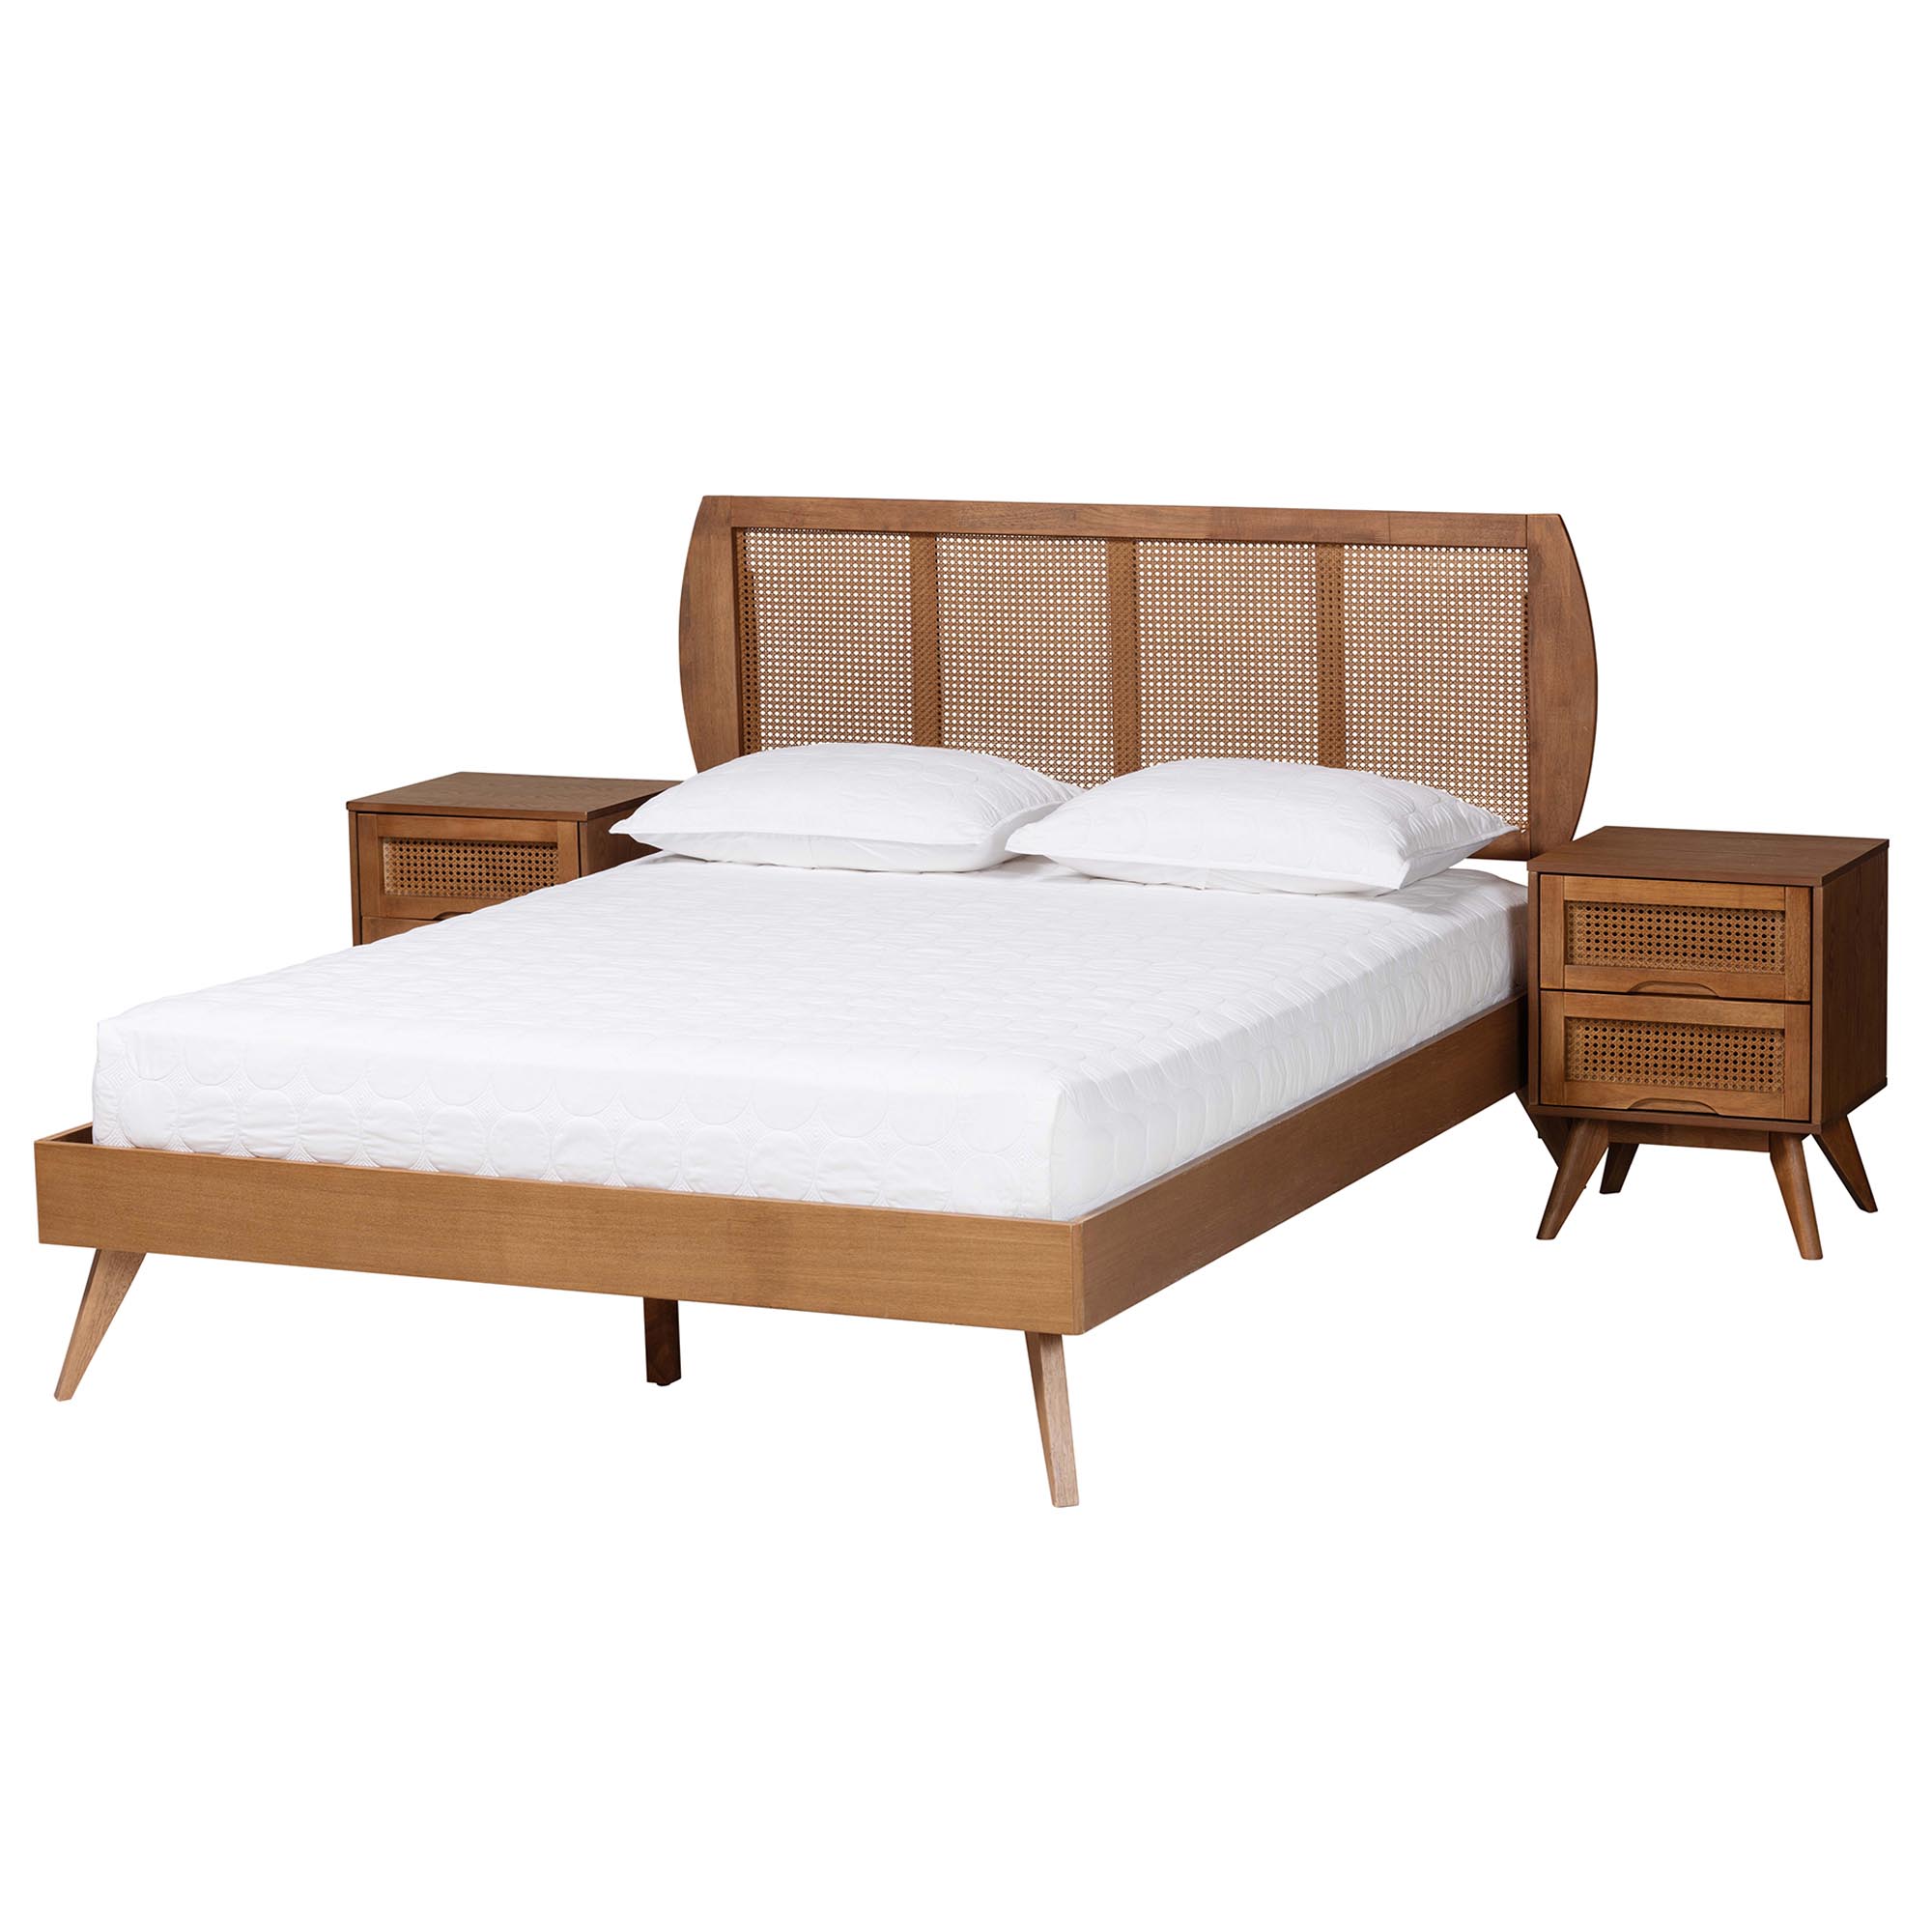 Baxton Studio Asami Mid-Century Modern Walnut Brown Finished Wood and Woven Rattan Full Size 3-Piece Bedroom Set